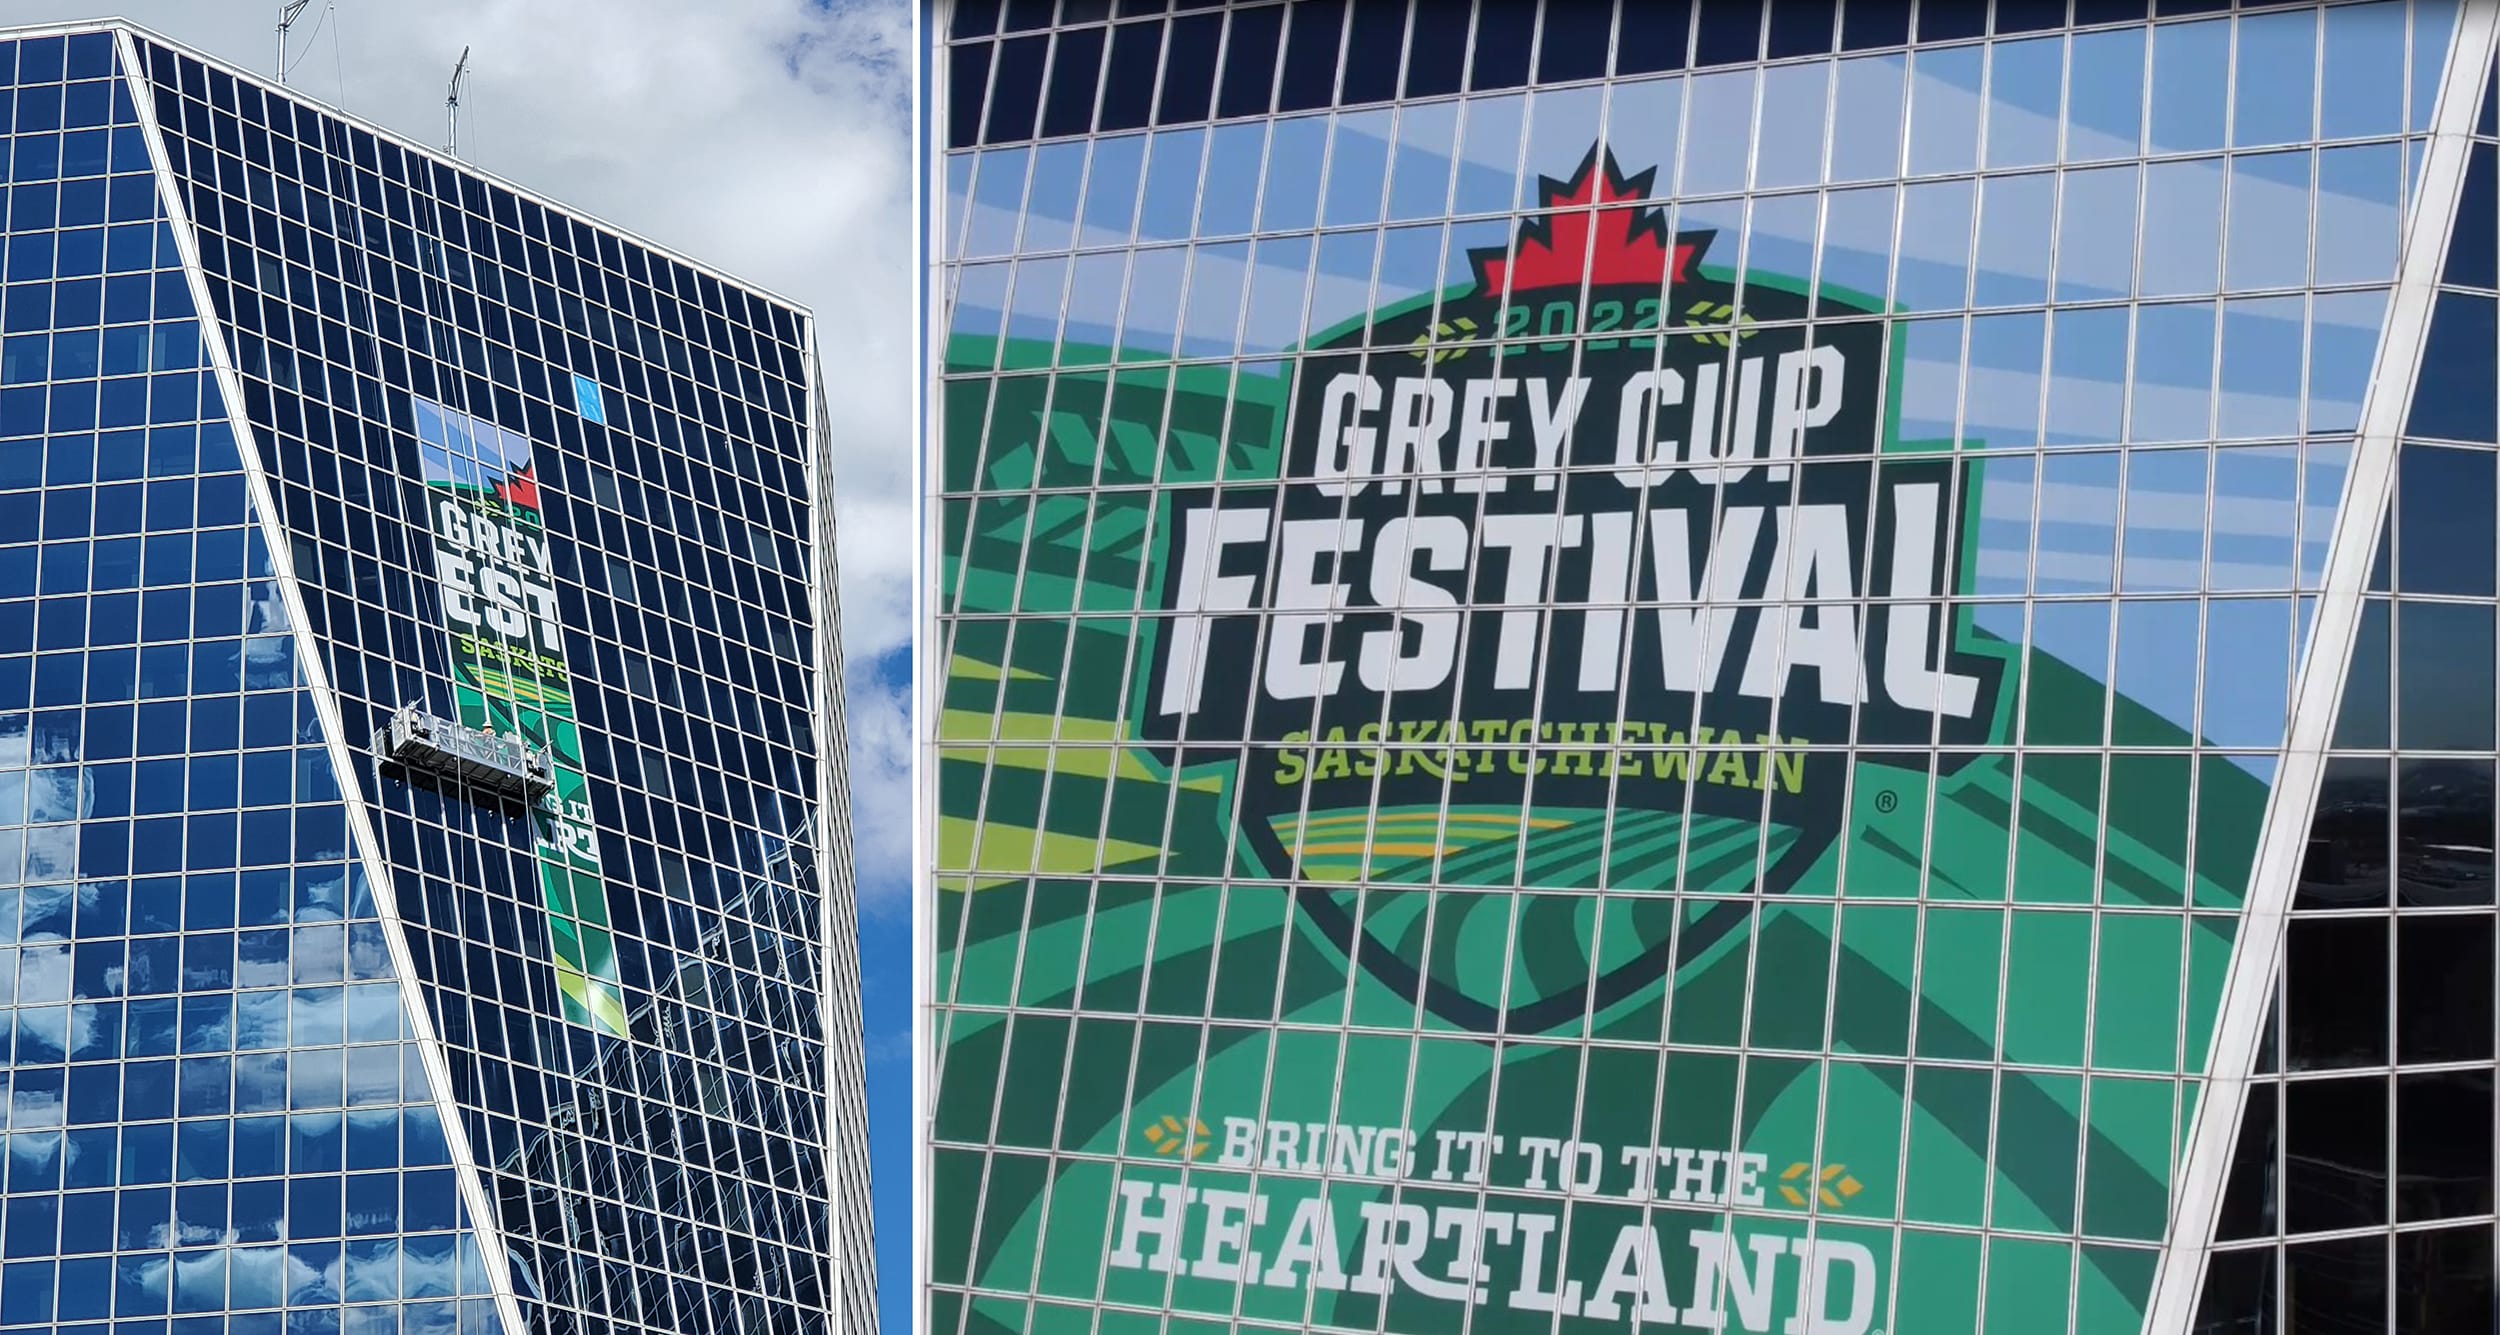 Sleek’s installers (above), using the only accessible single swing stage for the project. The Grey Cup Festival centers around the Canadian Football League’s championship game. 